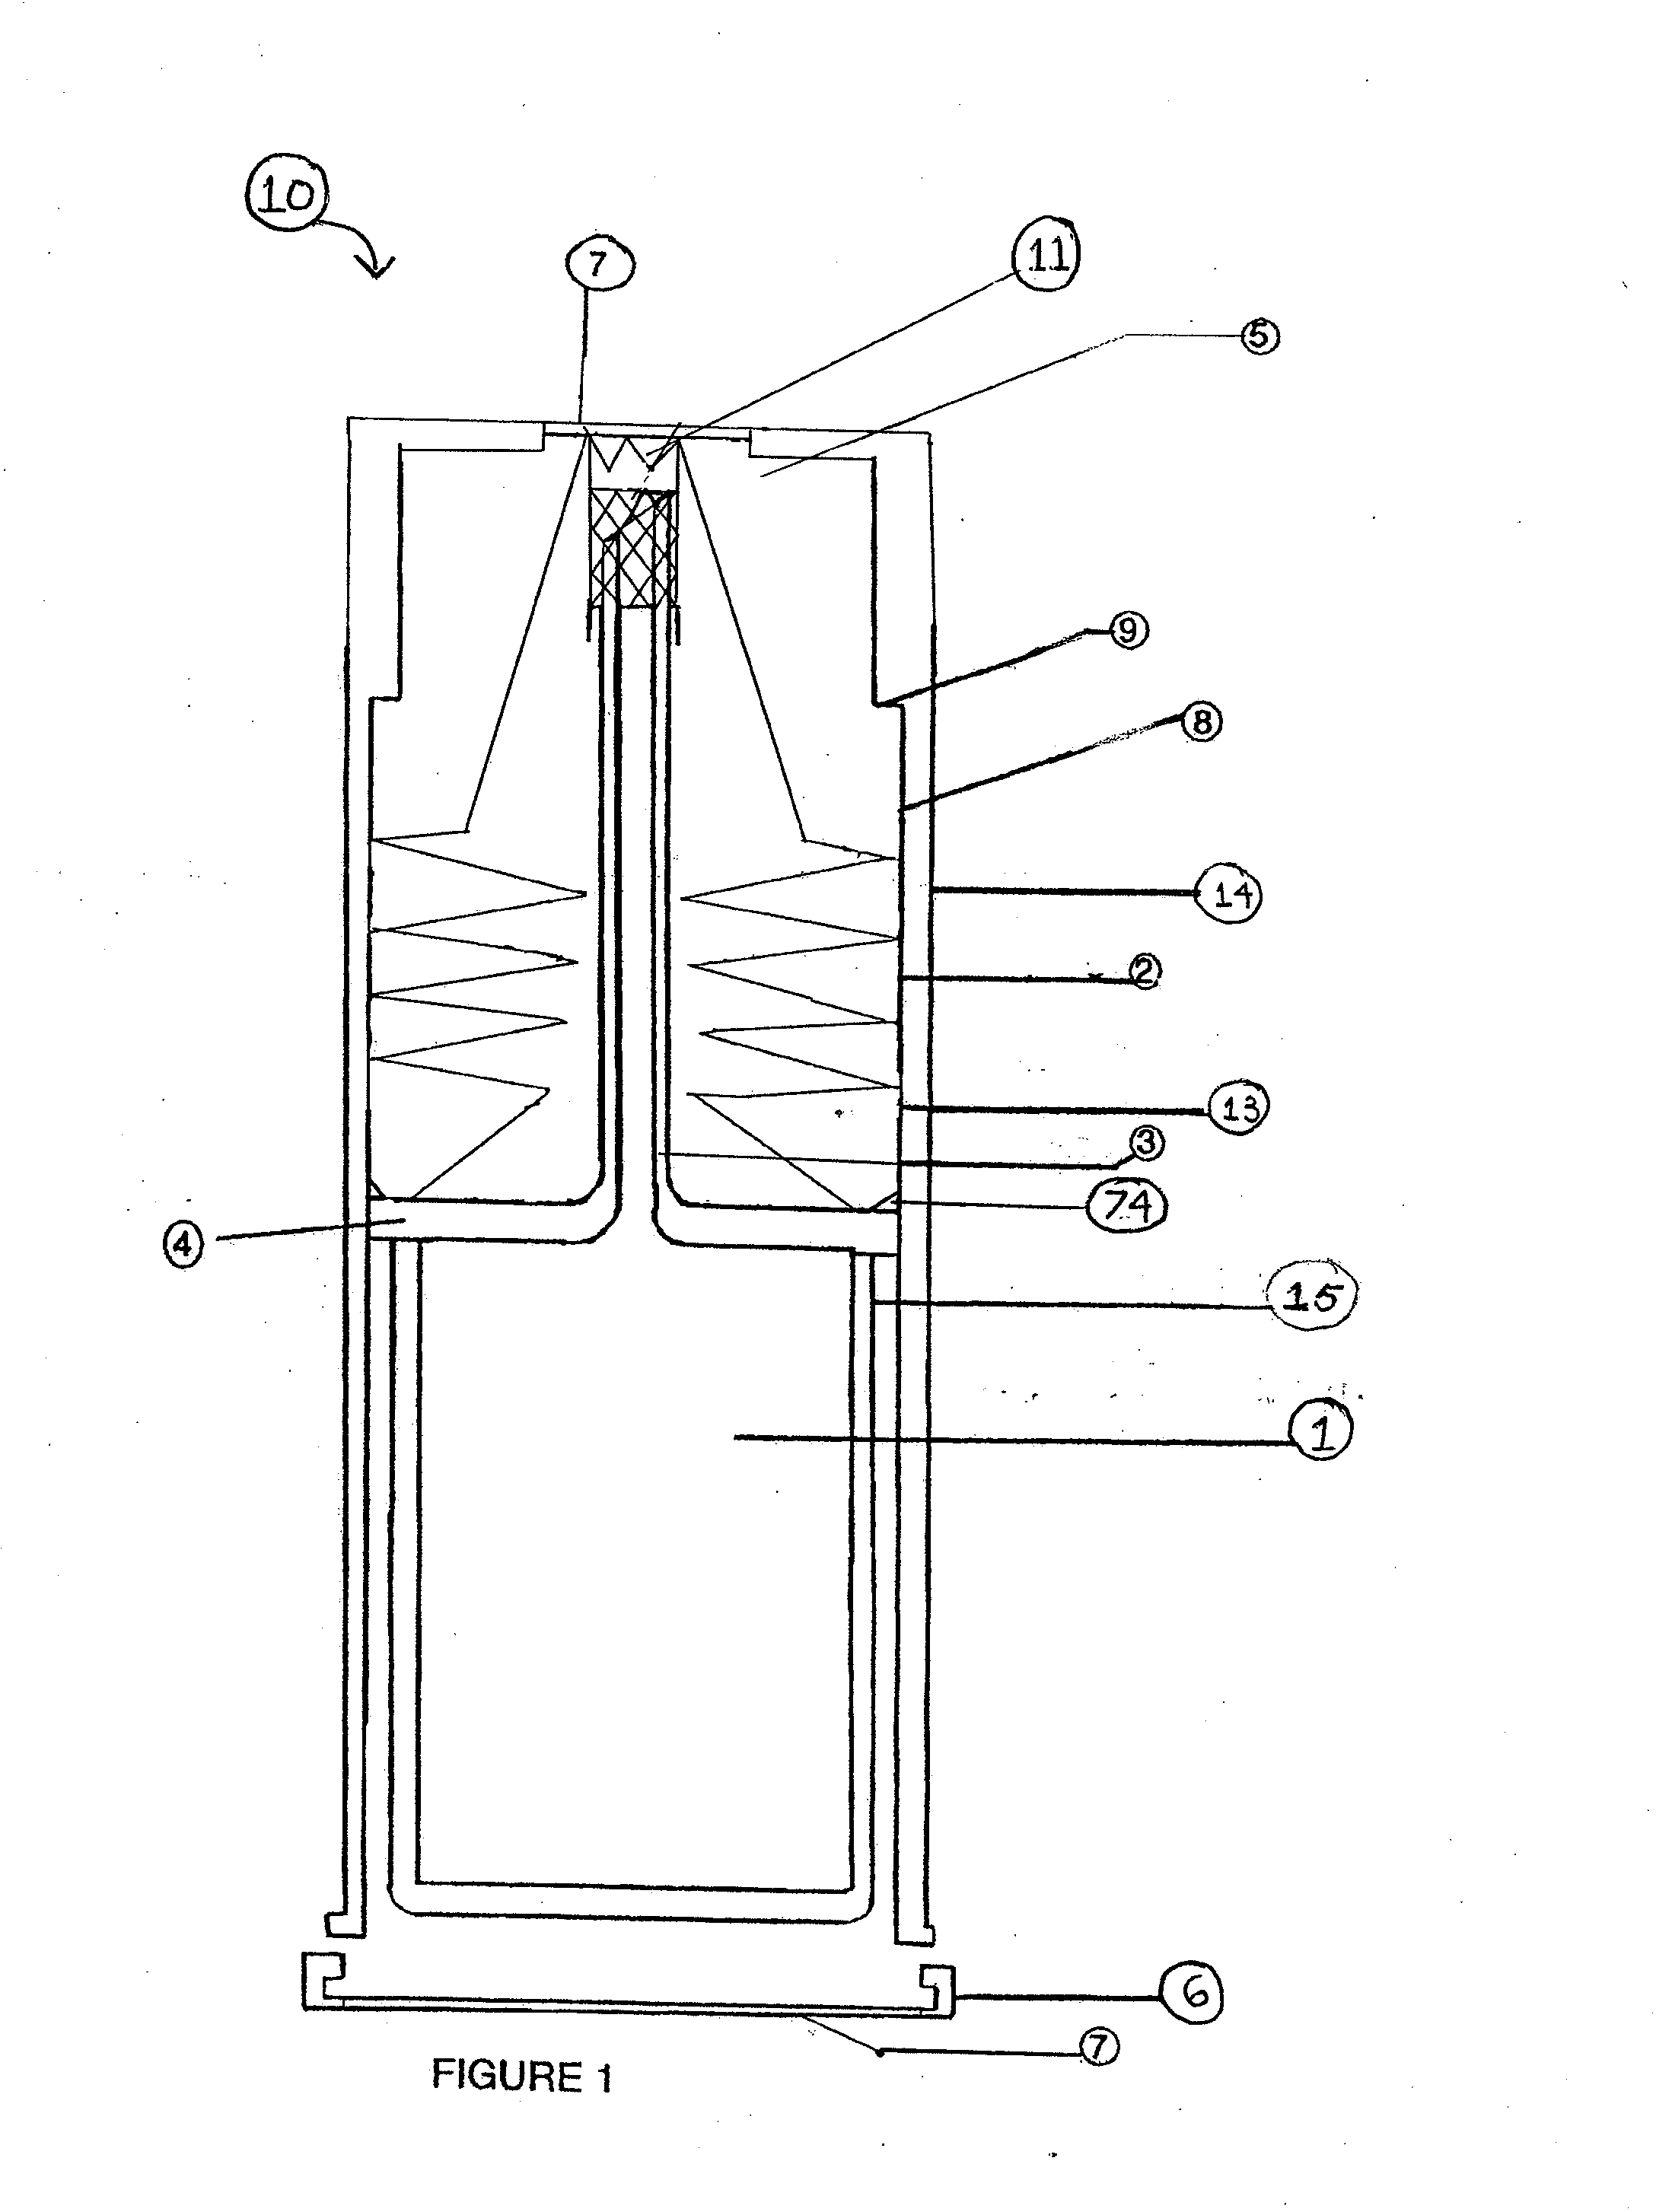 Continuous Feed Hypodermic Syringe with Self Contained Cartridge Dispenser